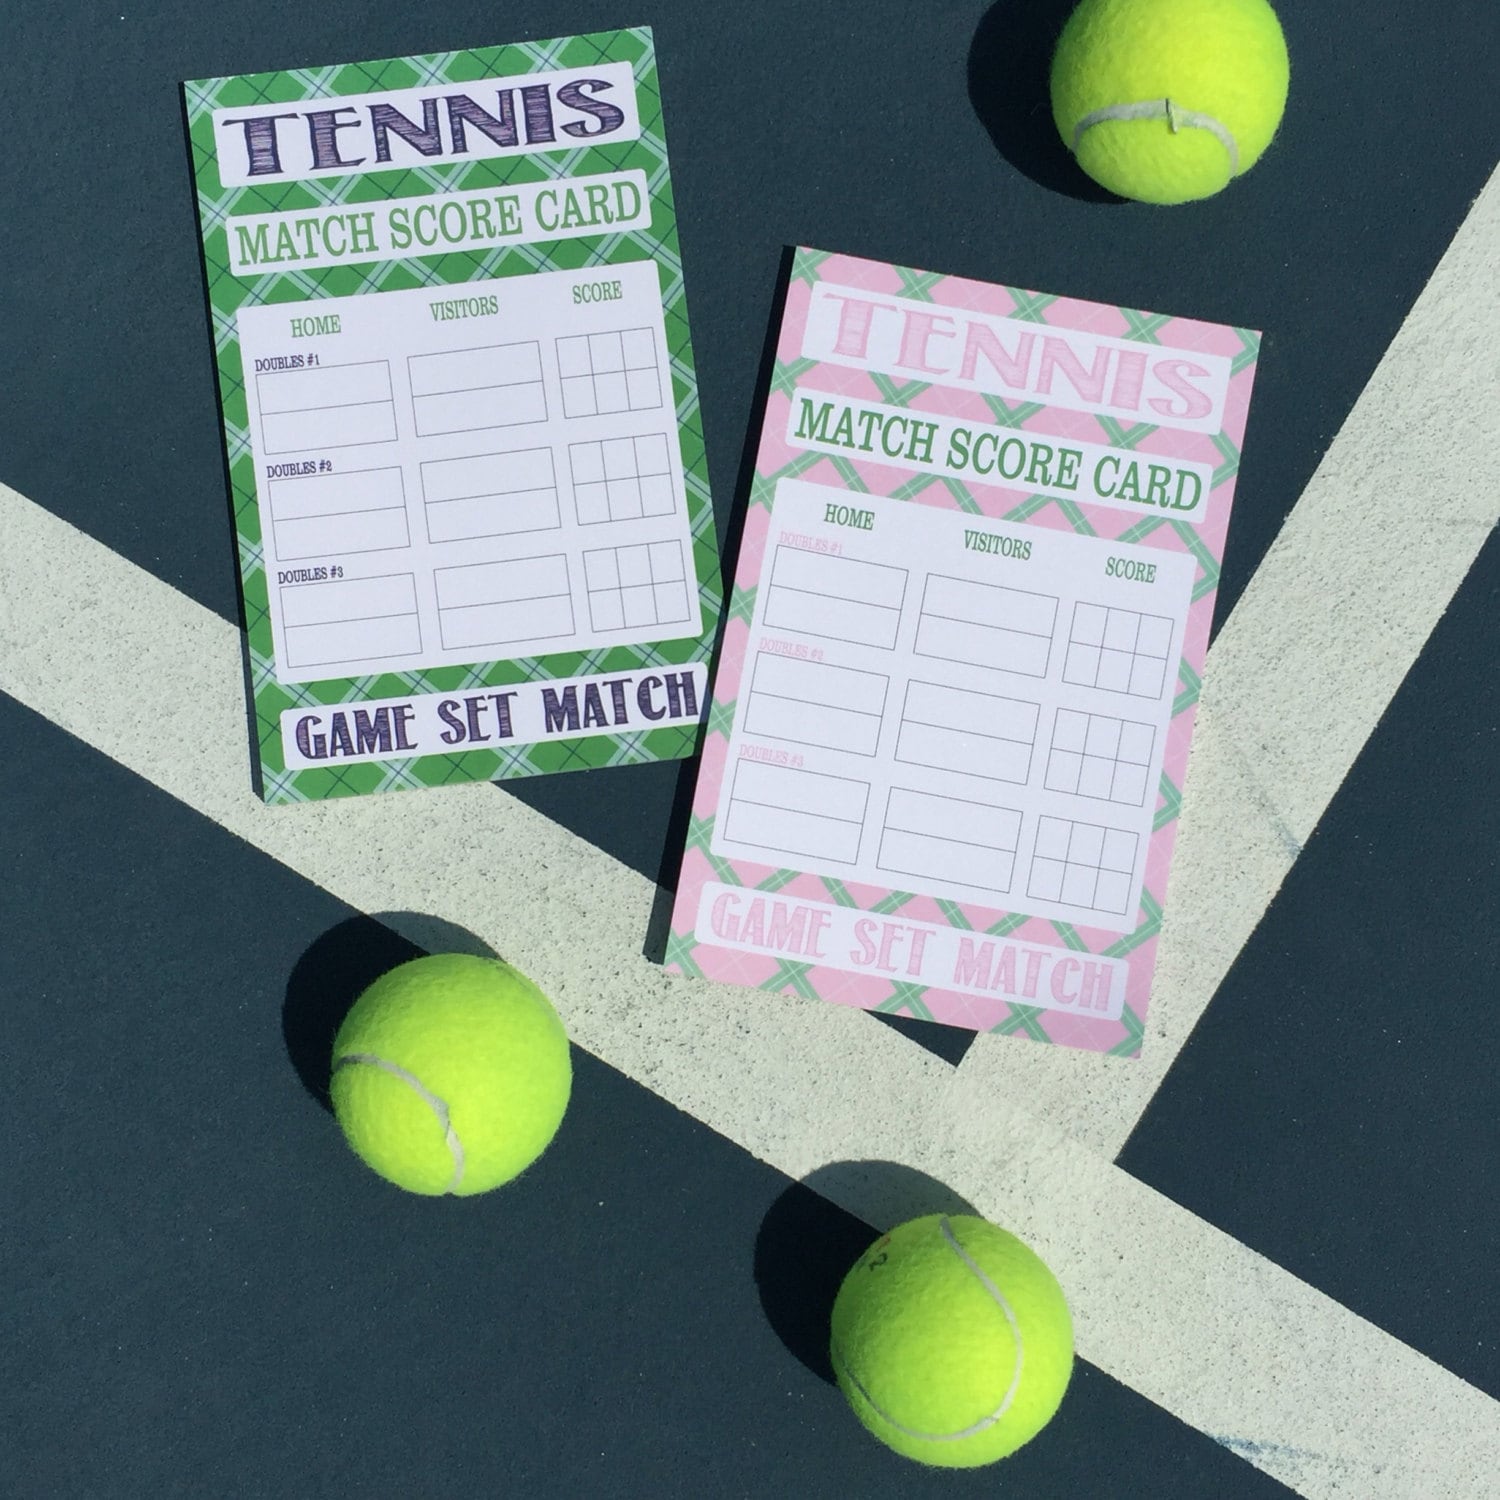 Tennis Match Score Card for Doubles Only